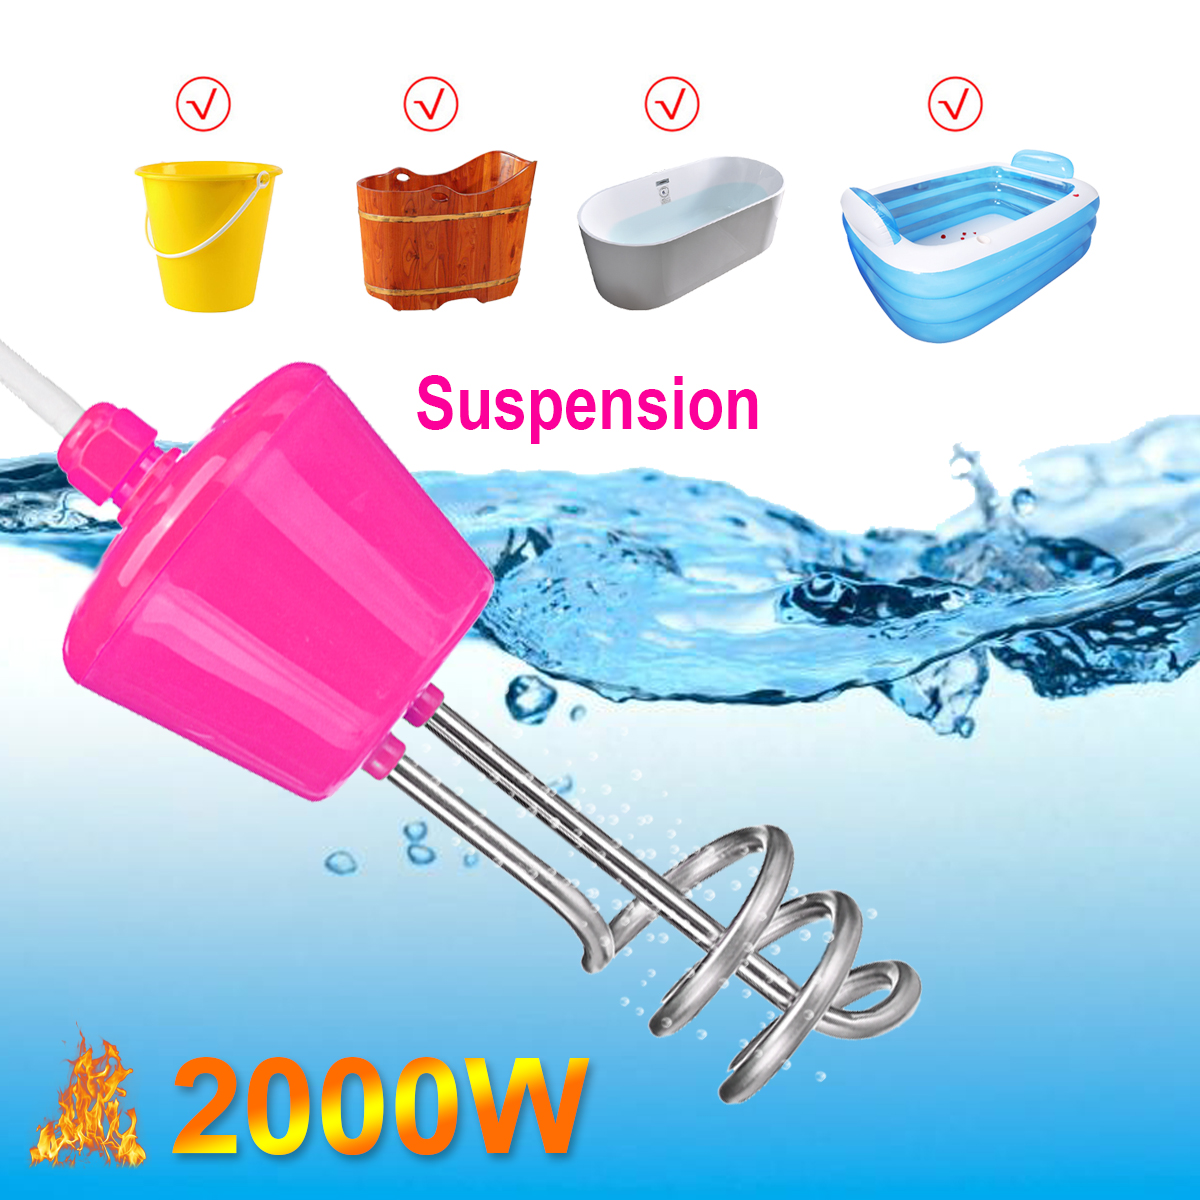 2000W-Suspension-Immersion-Water-Heater-Stainless-Steel-for-Inflatable-Pool-Tub-1339737-2